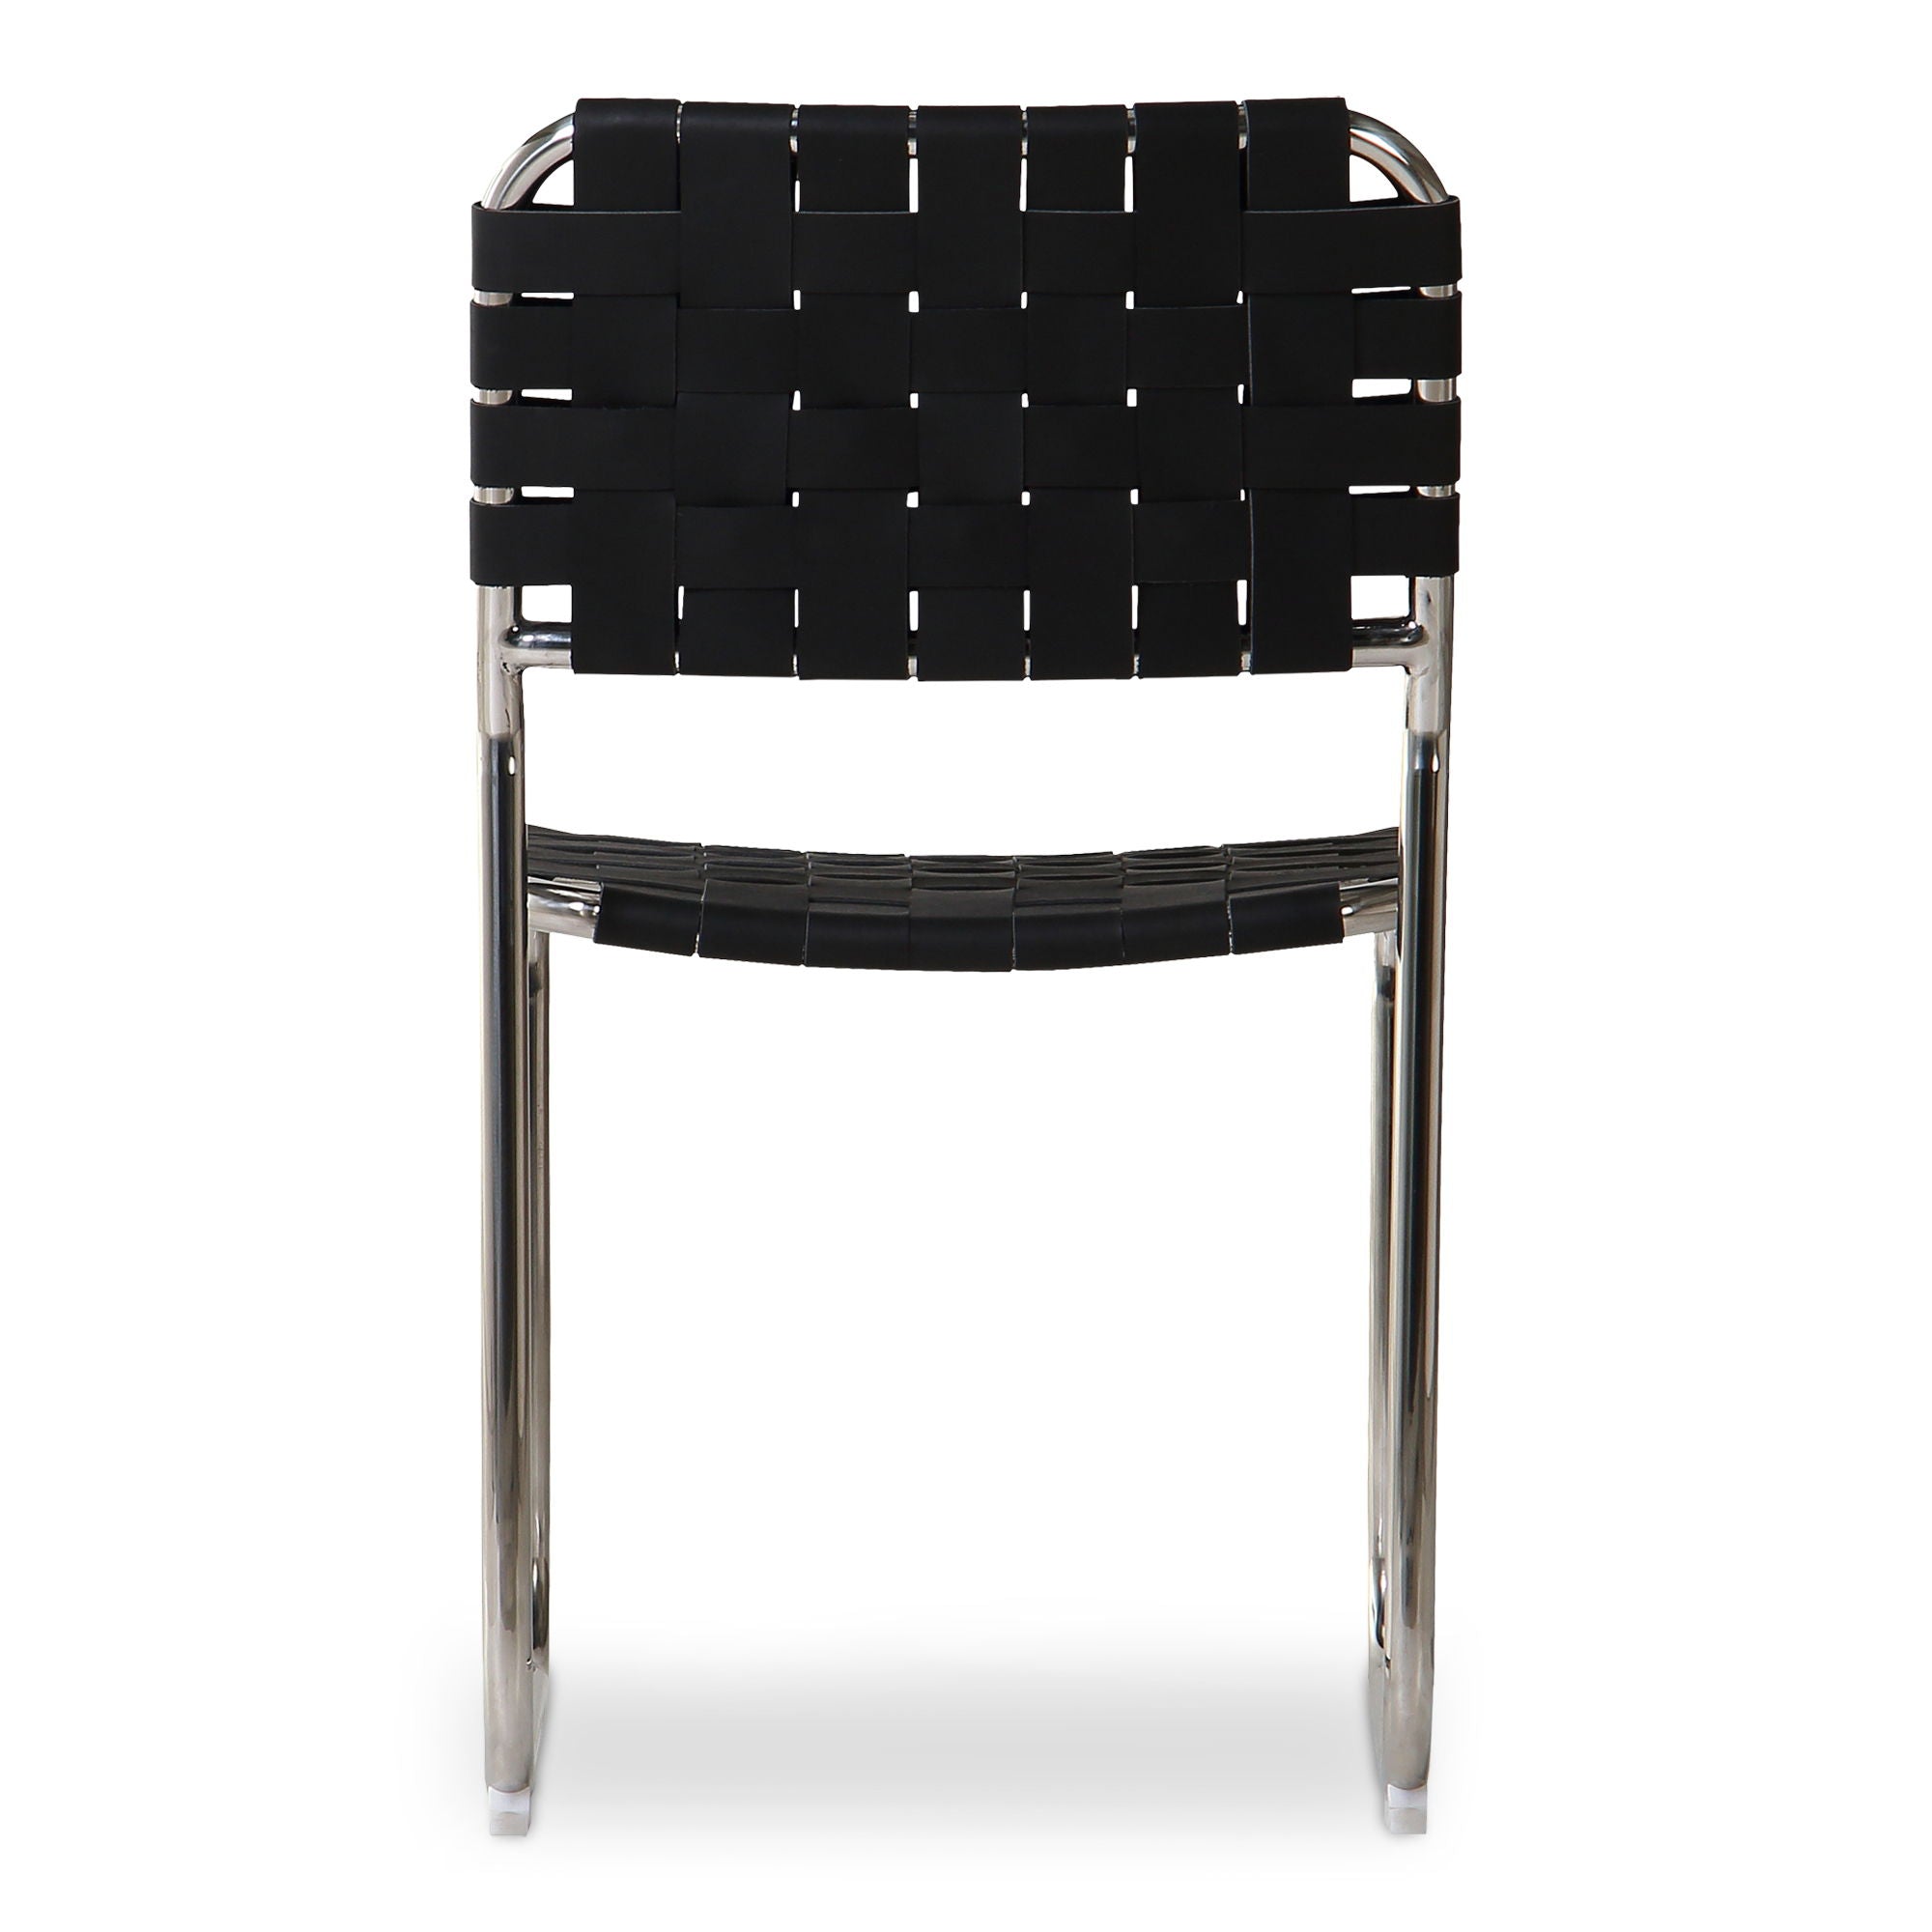 Moma - Stainless Steel Dining Chair (Set of 2) - Black